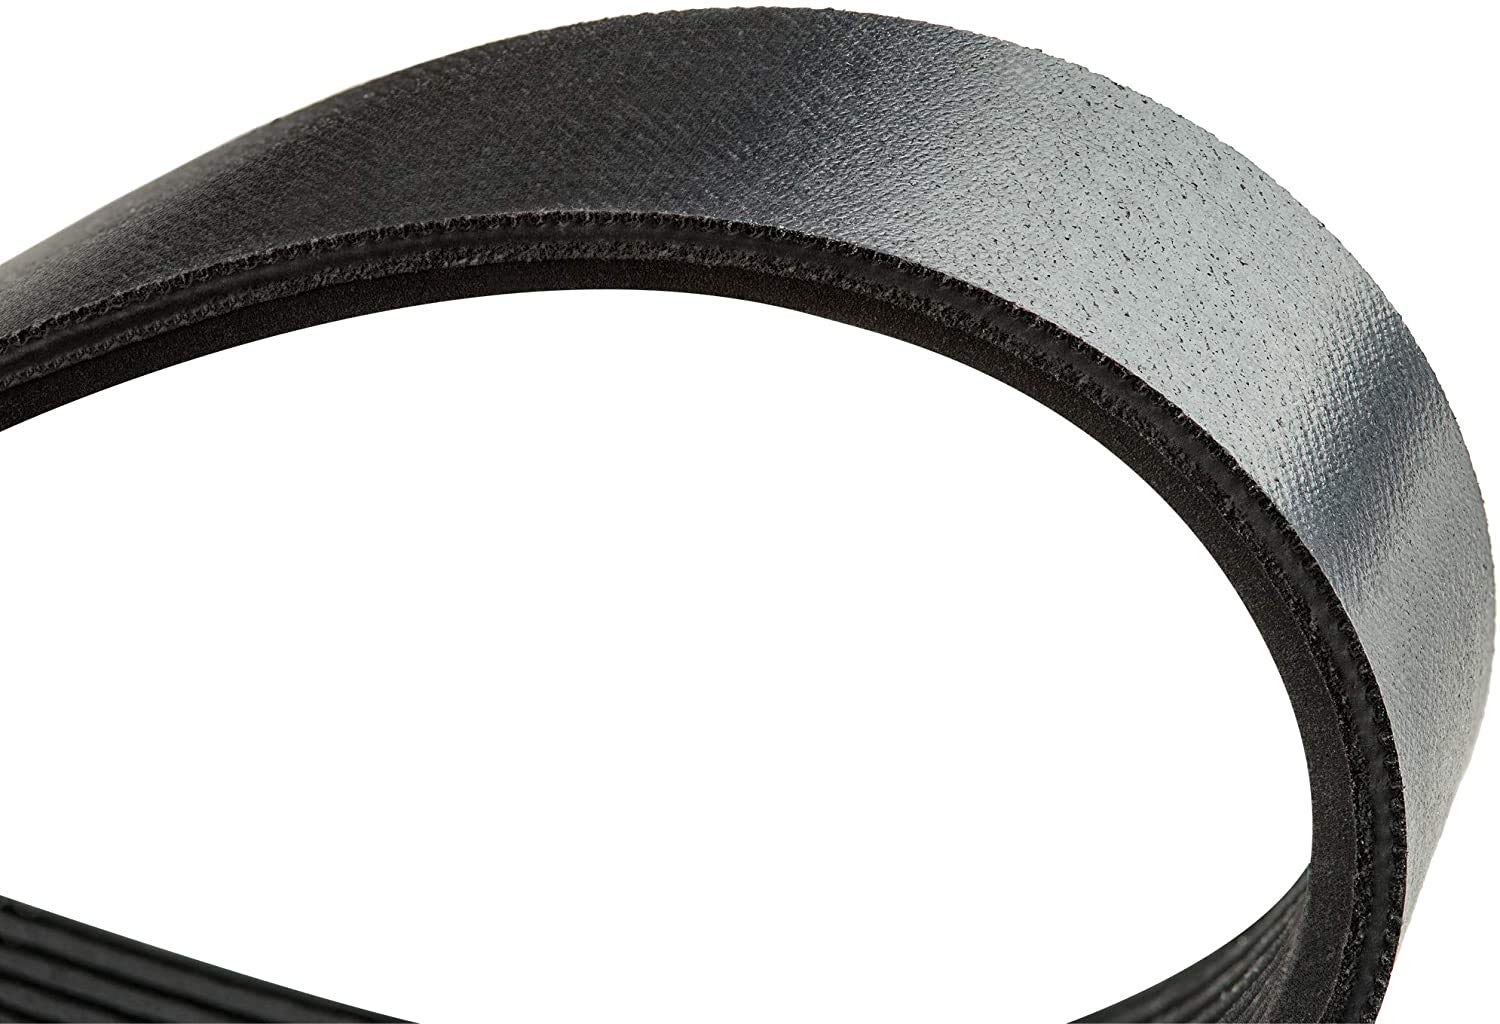 HASMX 1-Pack 24" Internal Length Drive Belt for Sears Craftsman Band Saw Models 119.224000 119.224010 351.224000 Replaces Part Number 1-JL20020002 JL20020002 29502.00